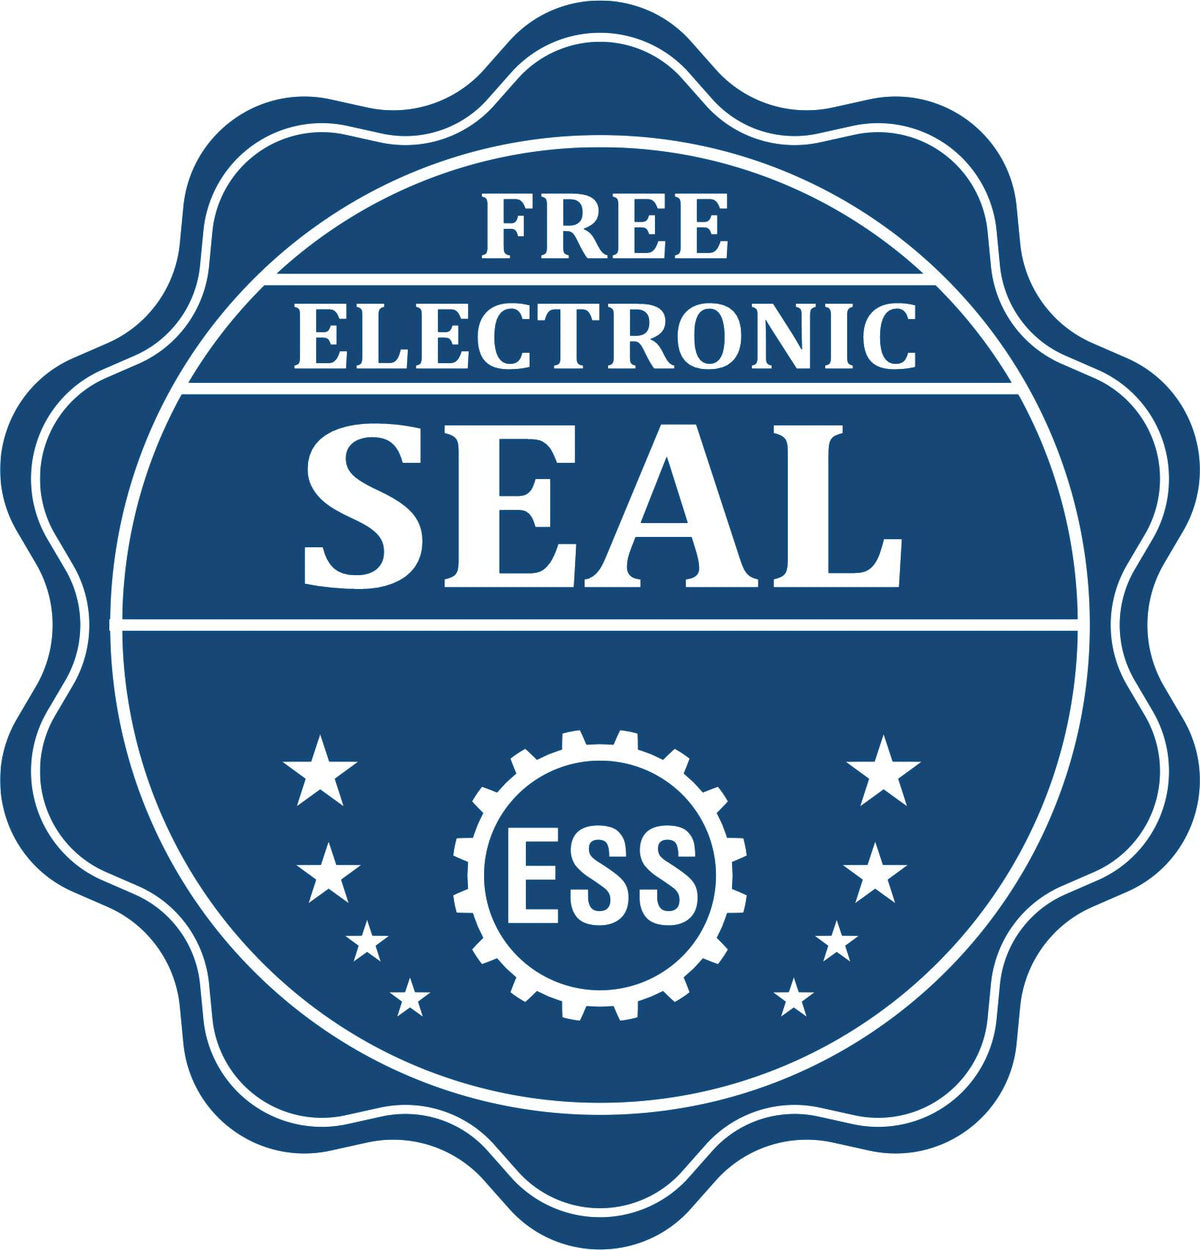 A badge showing a free electronic seal for the Slim Pre-Inked State Seal Notary Stamp for Virginia with stars and the ESS gear on the emblem.